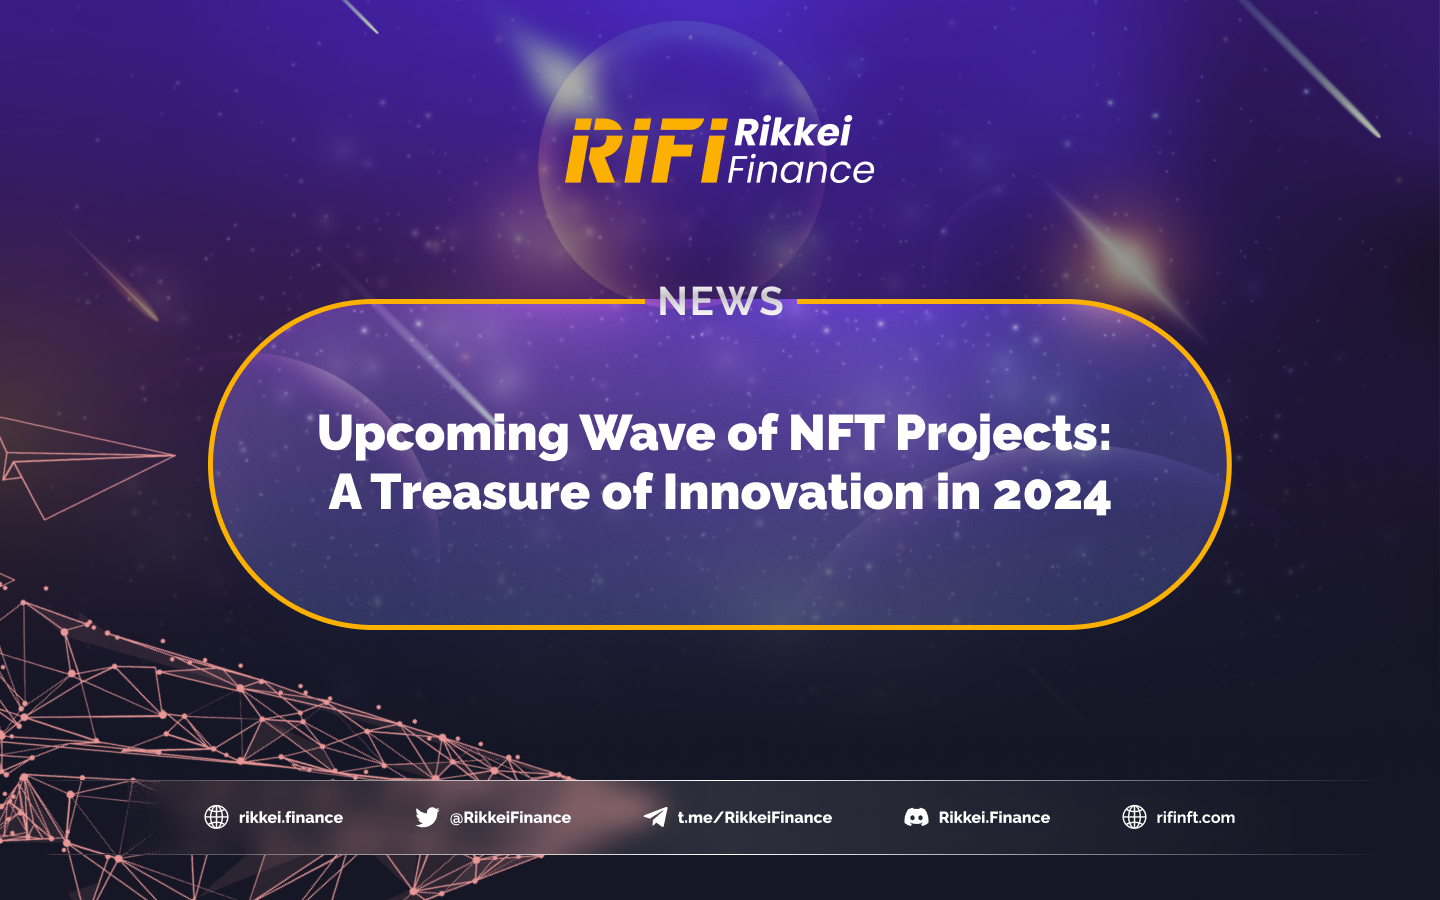 Upcoming NFT Projects: A Treasure of Innovation in 2024